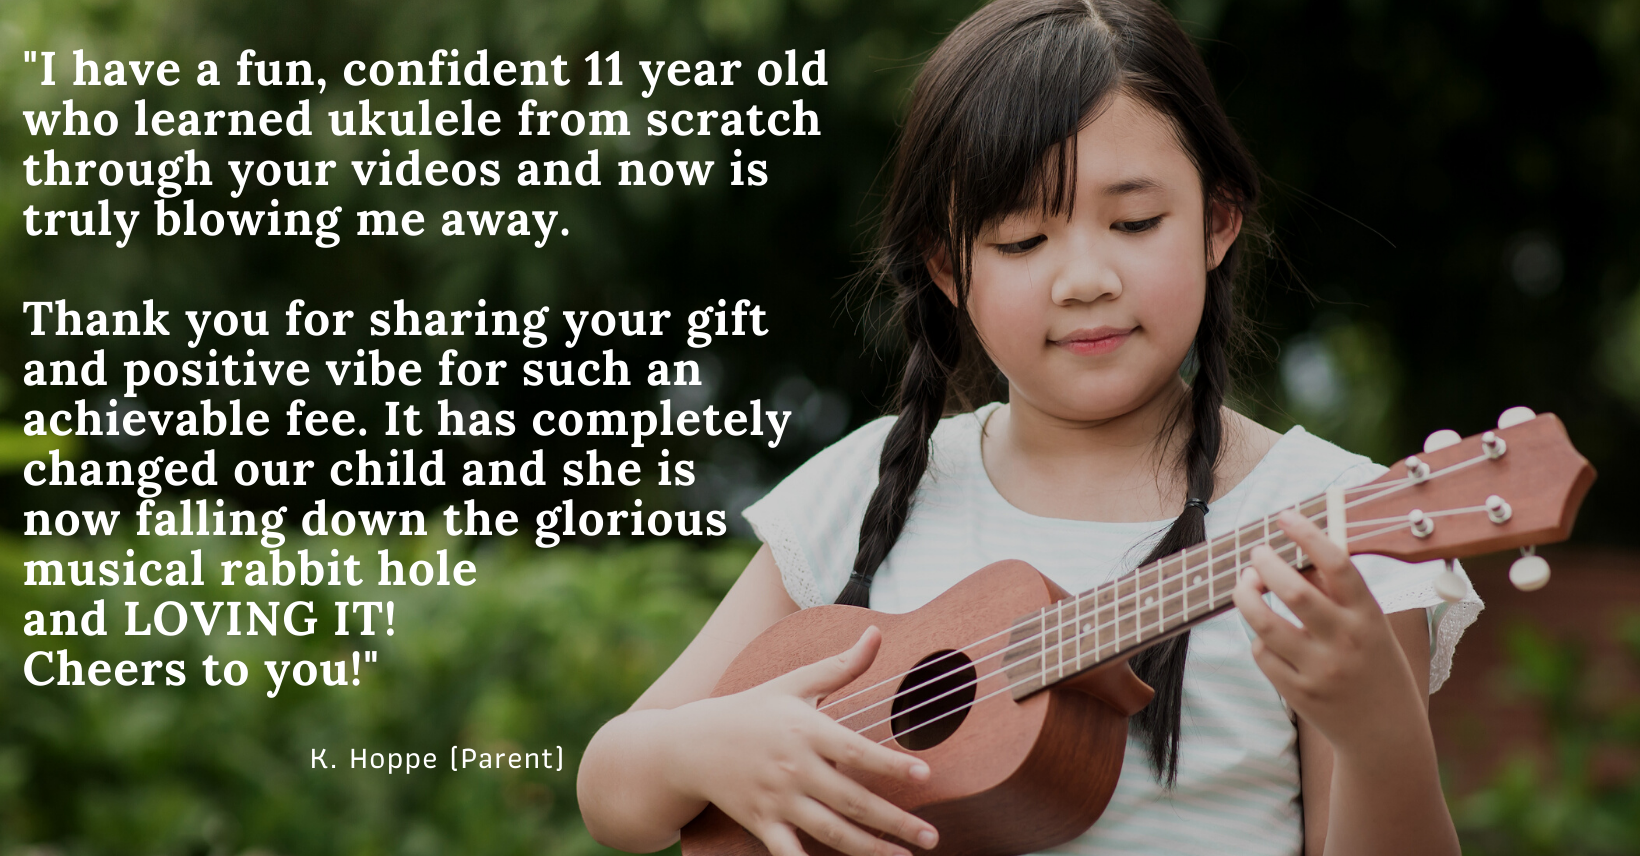 picture of girl playing ukulele with quote from parent in text